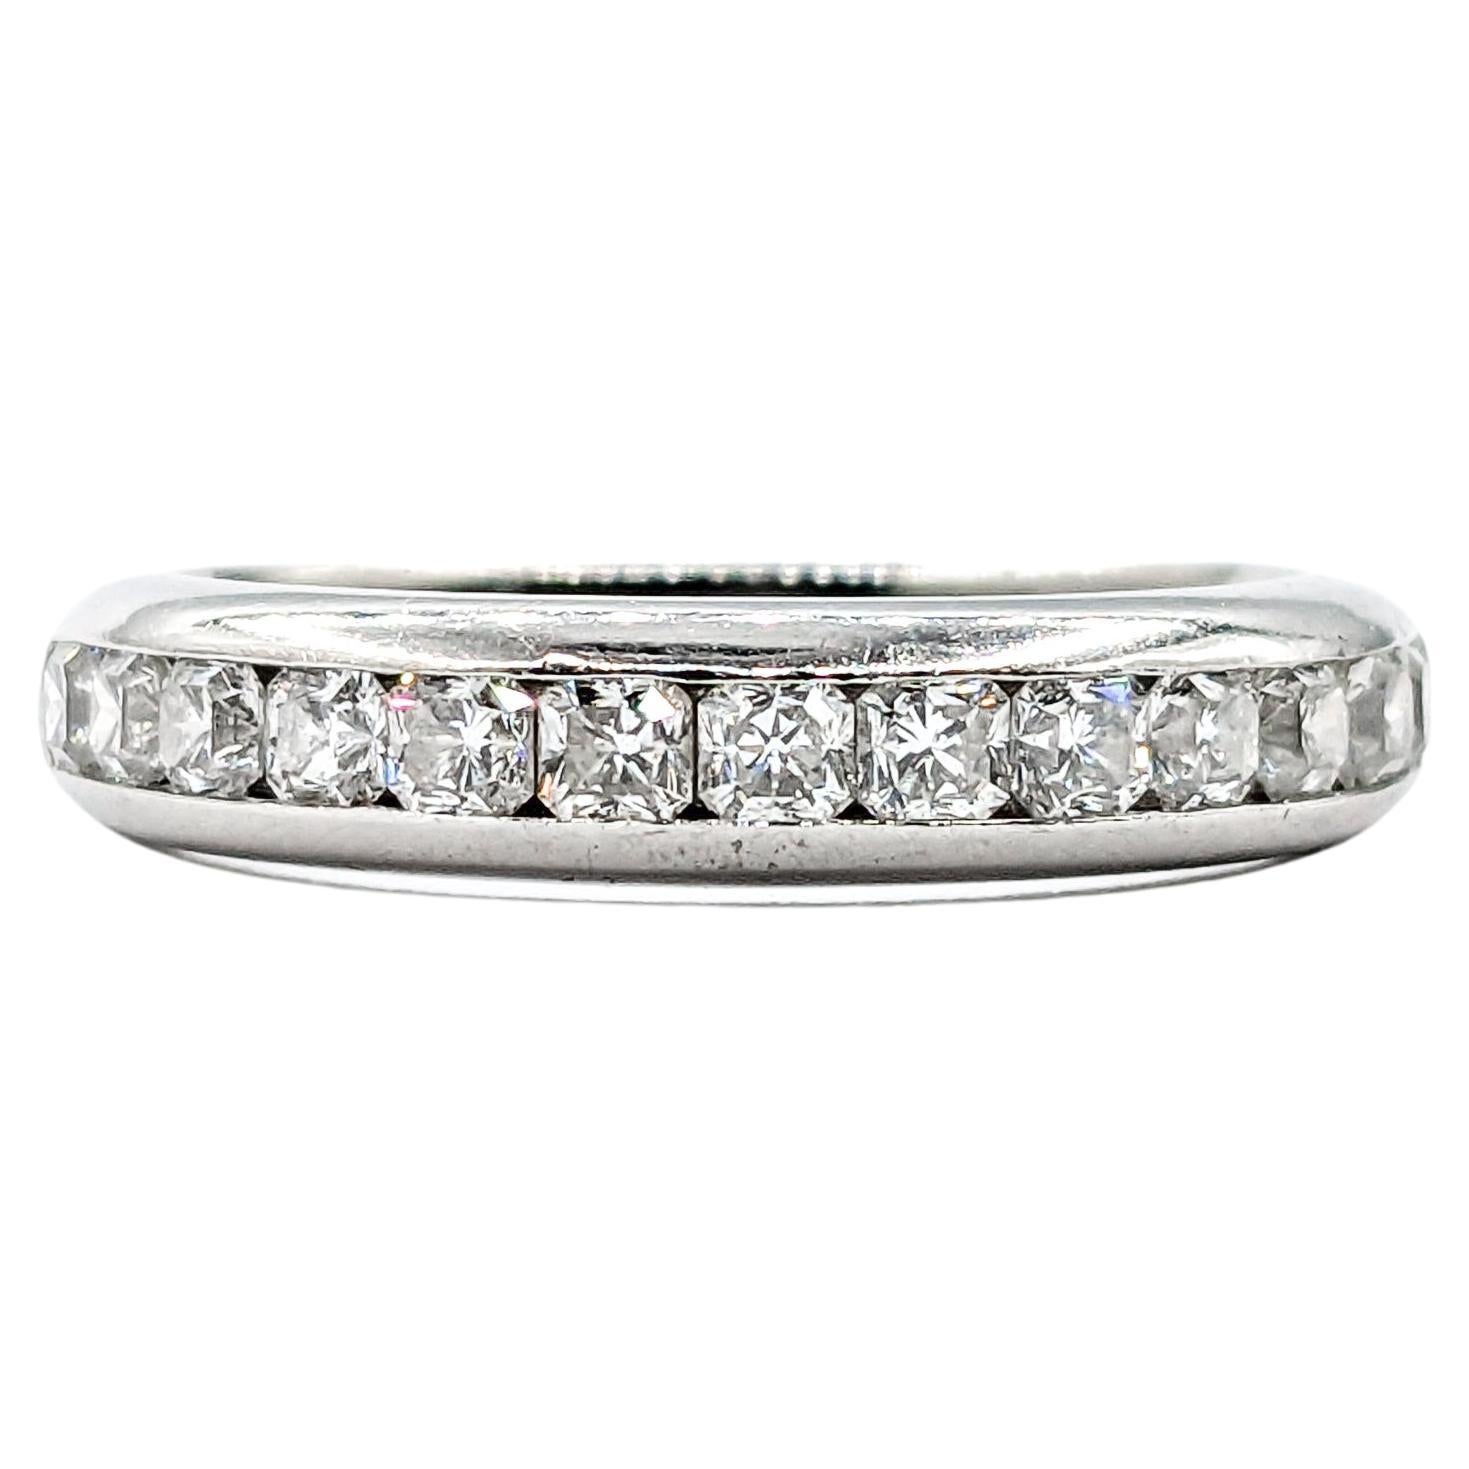 Tiffany & Co Lucida 1.00ctw Diamond Channel Band Ring in Platinum